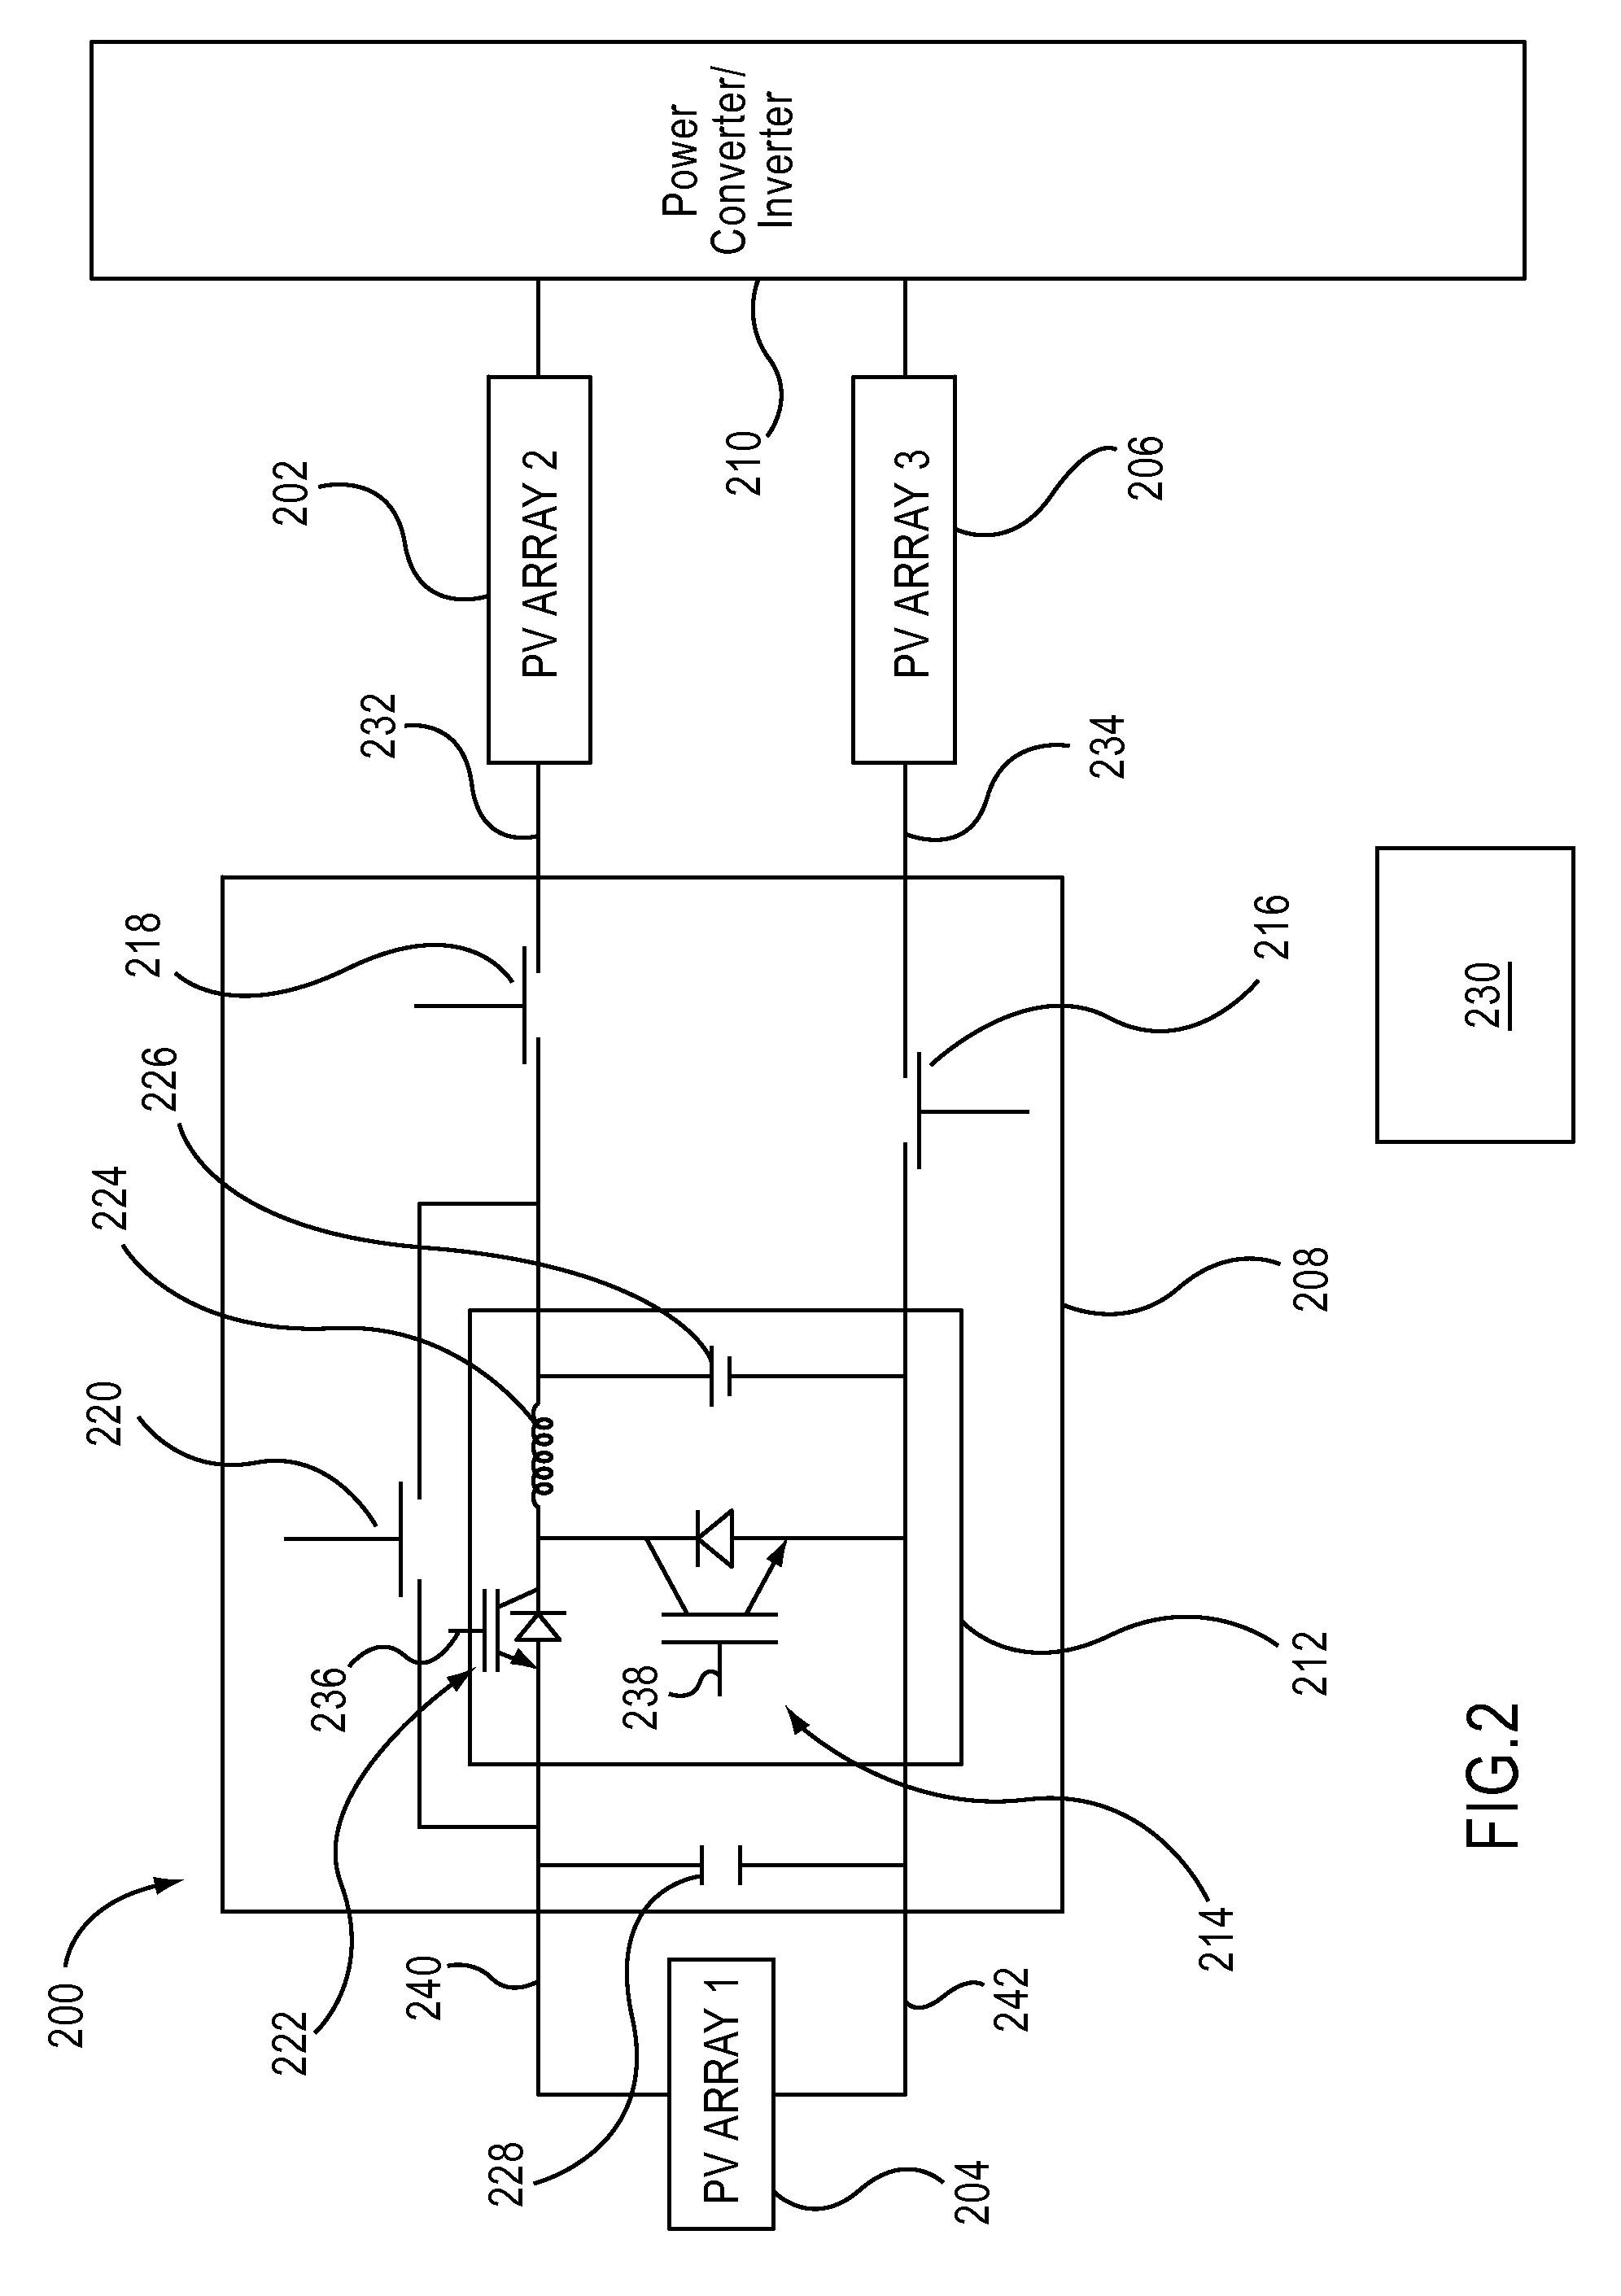 Device system and method for coupling multiple photovoltaic arrays